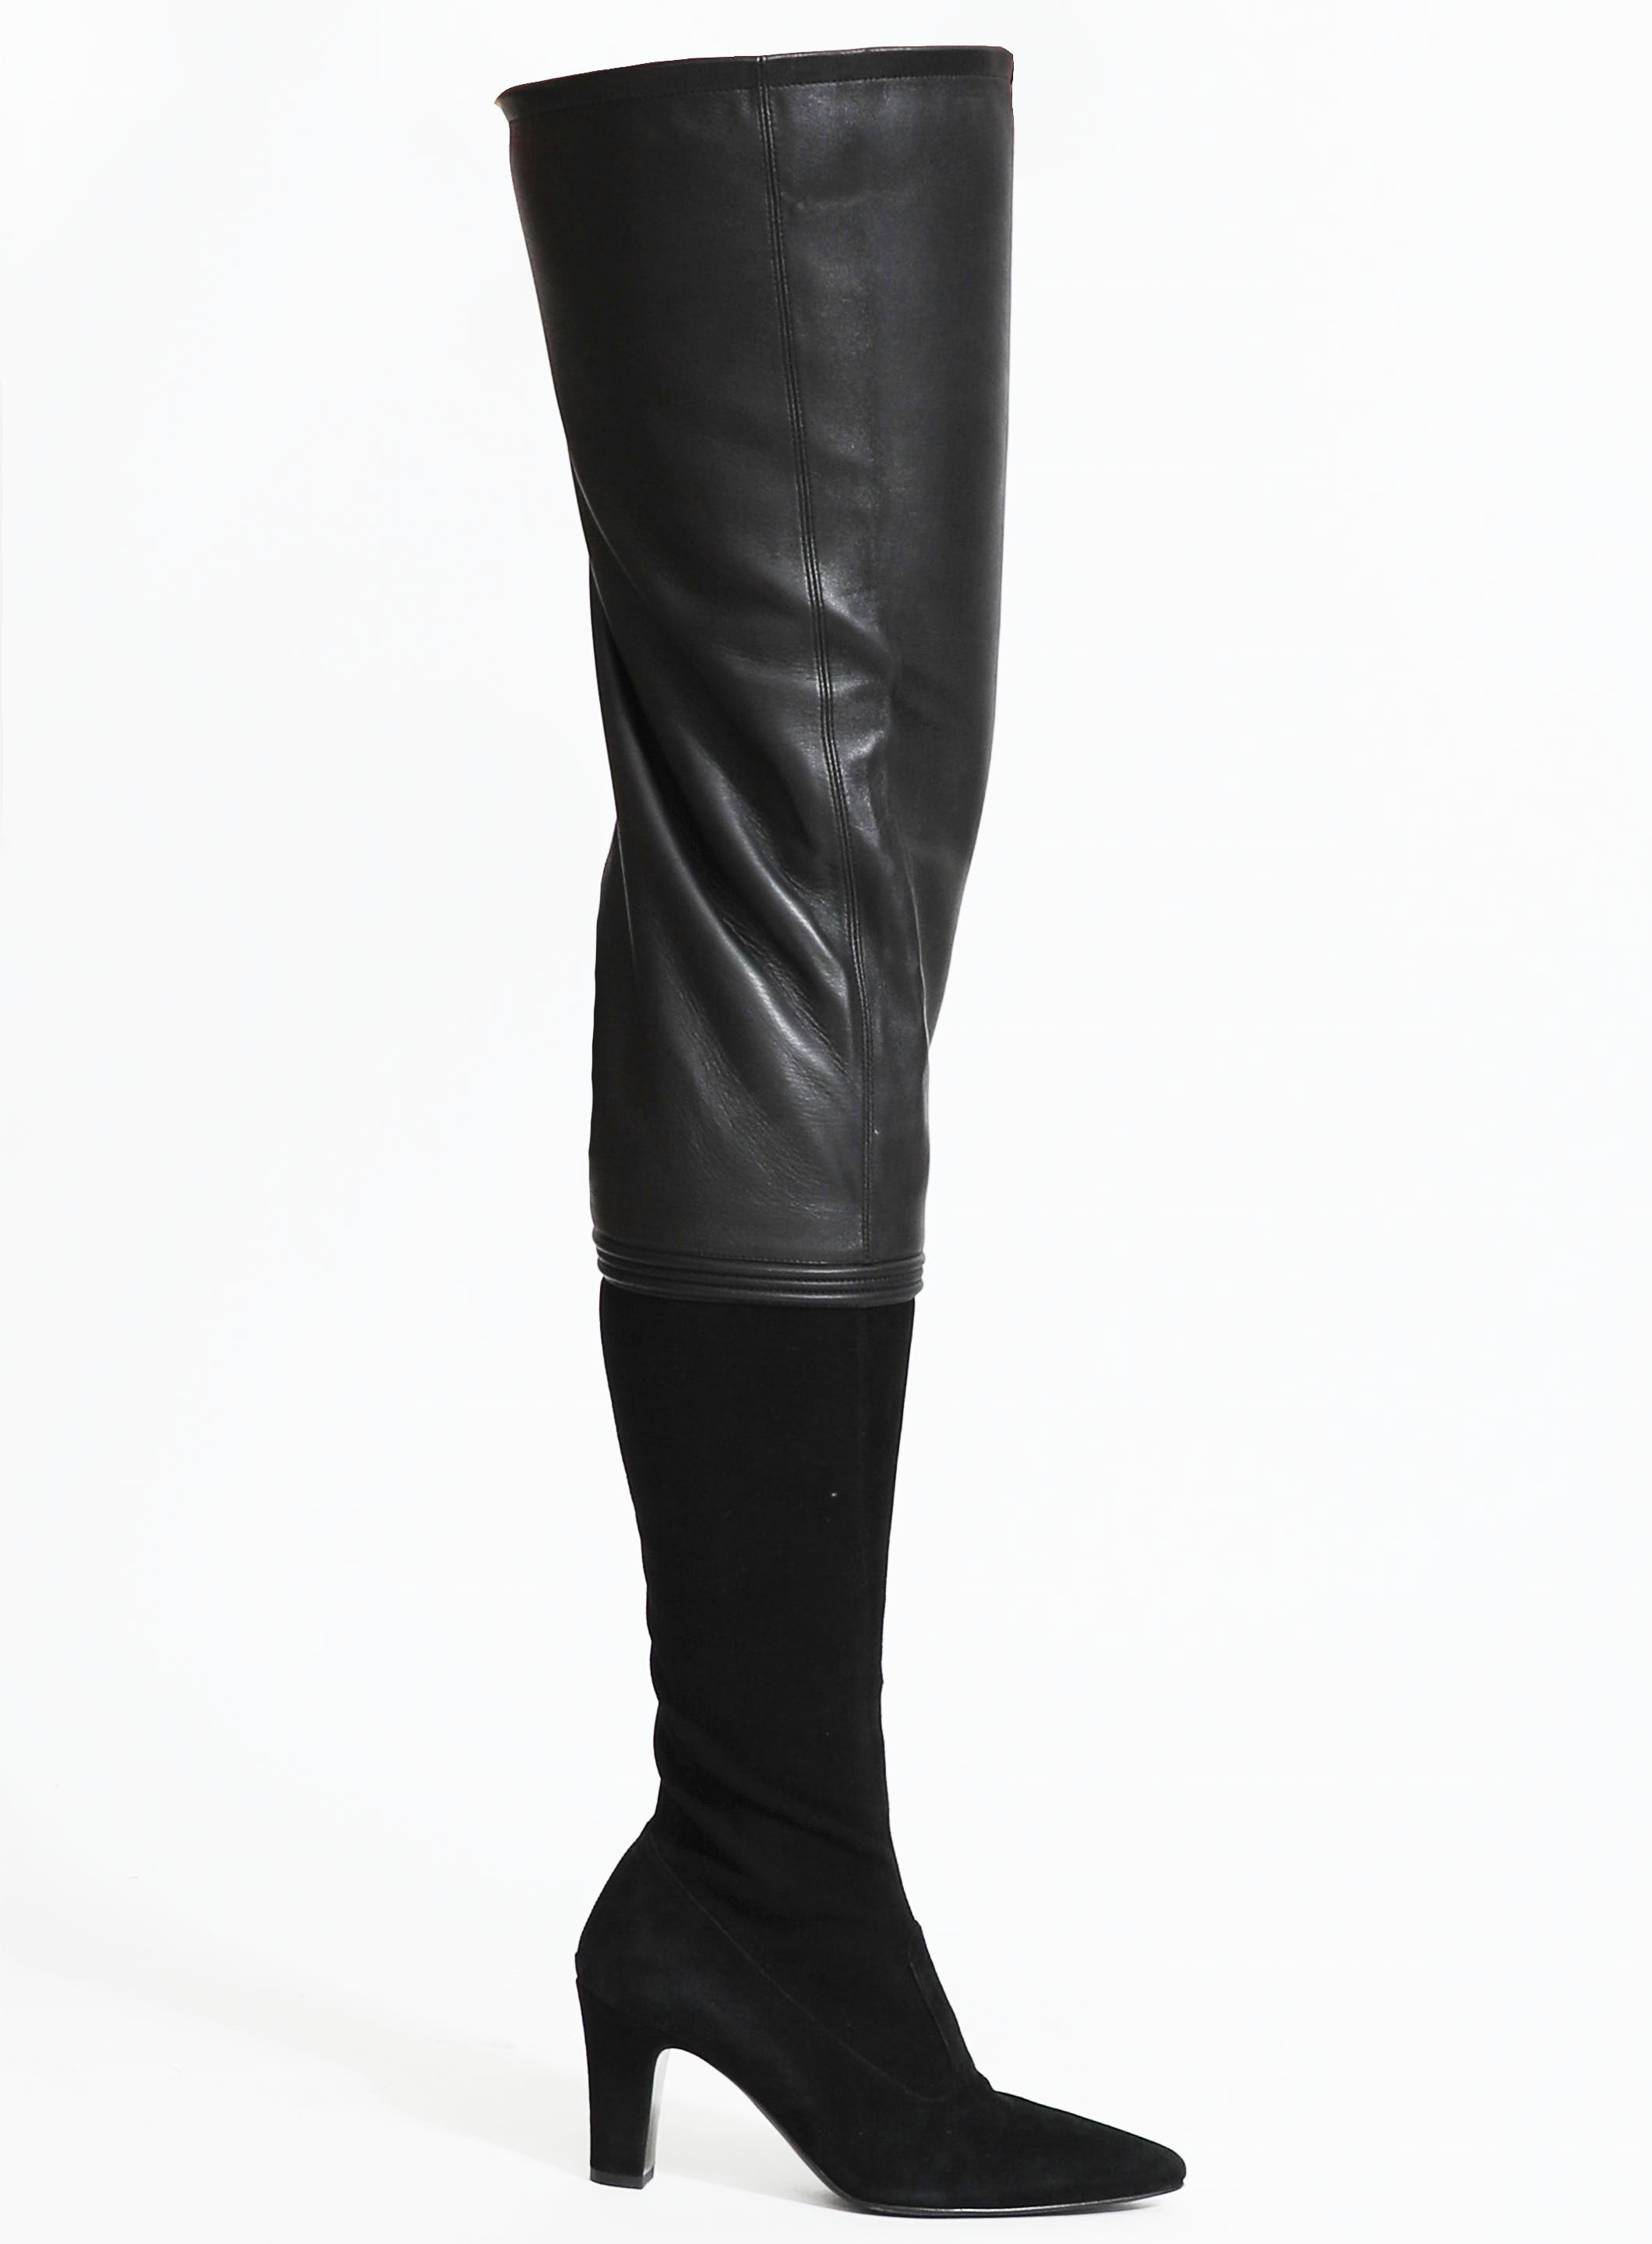 Thigh-High Leather Suede 'CC' Boots, Authentic & Vintage